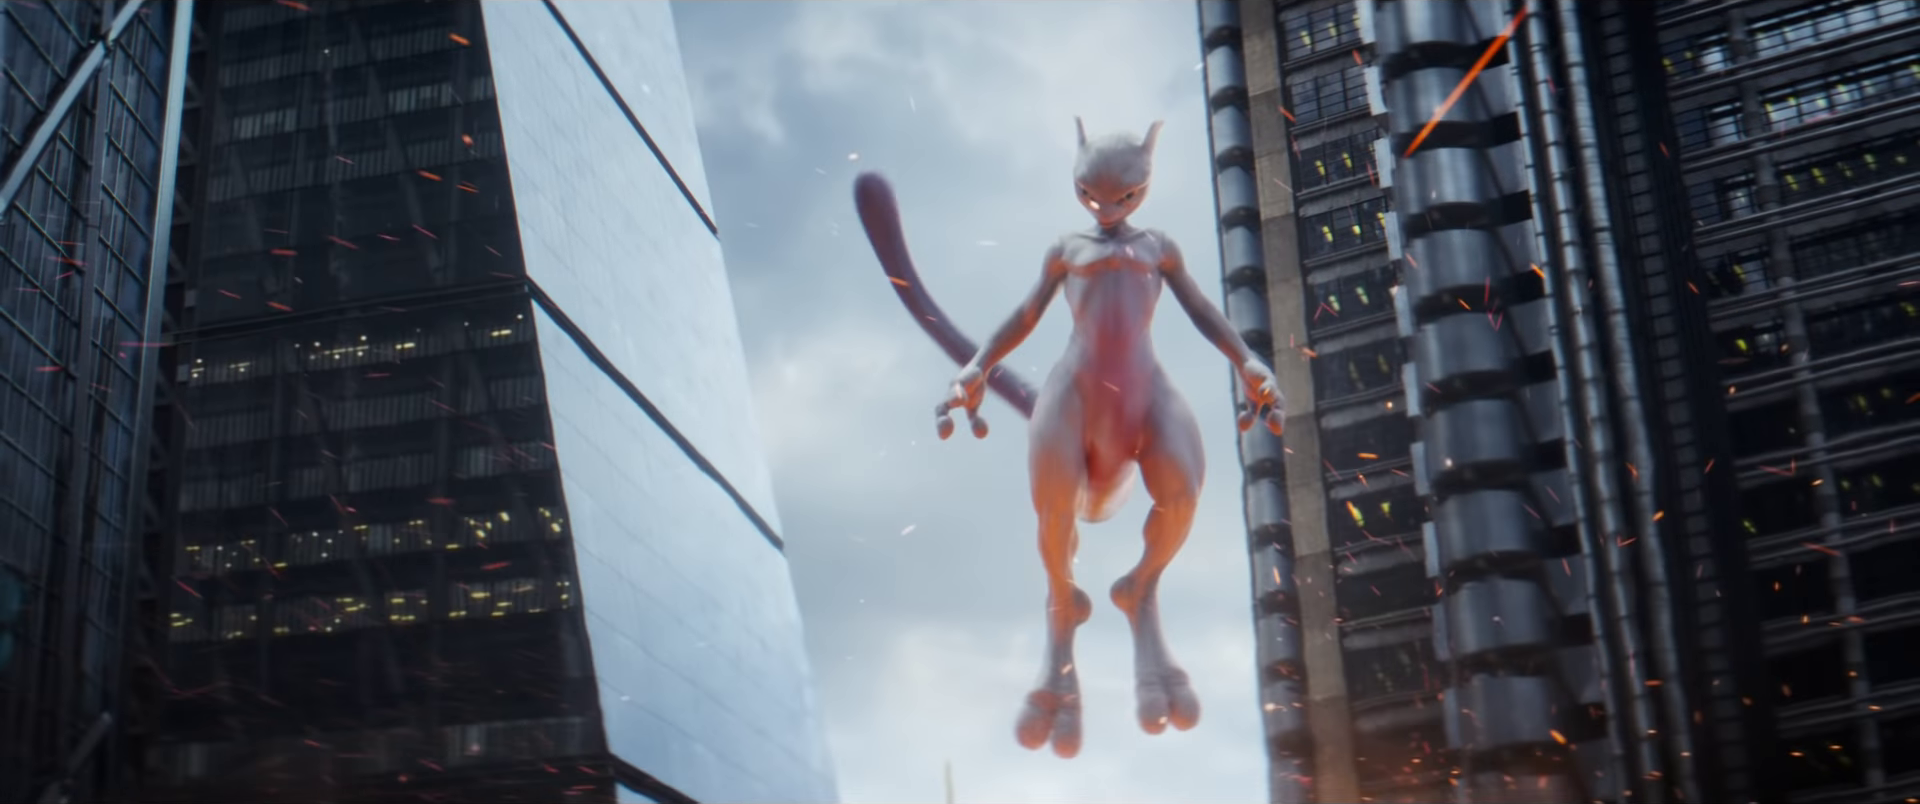 In Pokémon:Detective Pikachu(2019), it was mention that Mewtwo was last  seen the Kanto region 20 years ago, which was also when the movie Mewtwo  Strikes Back(1999) was released in the Internationally. 